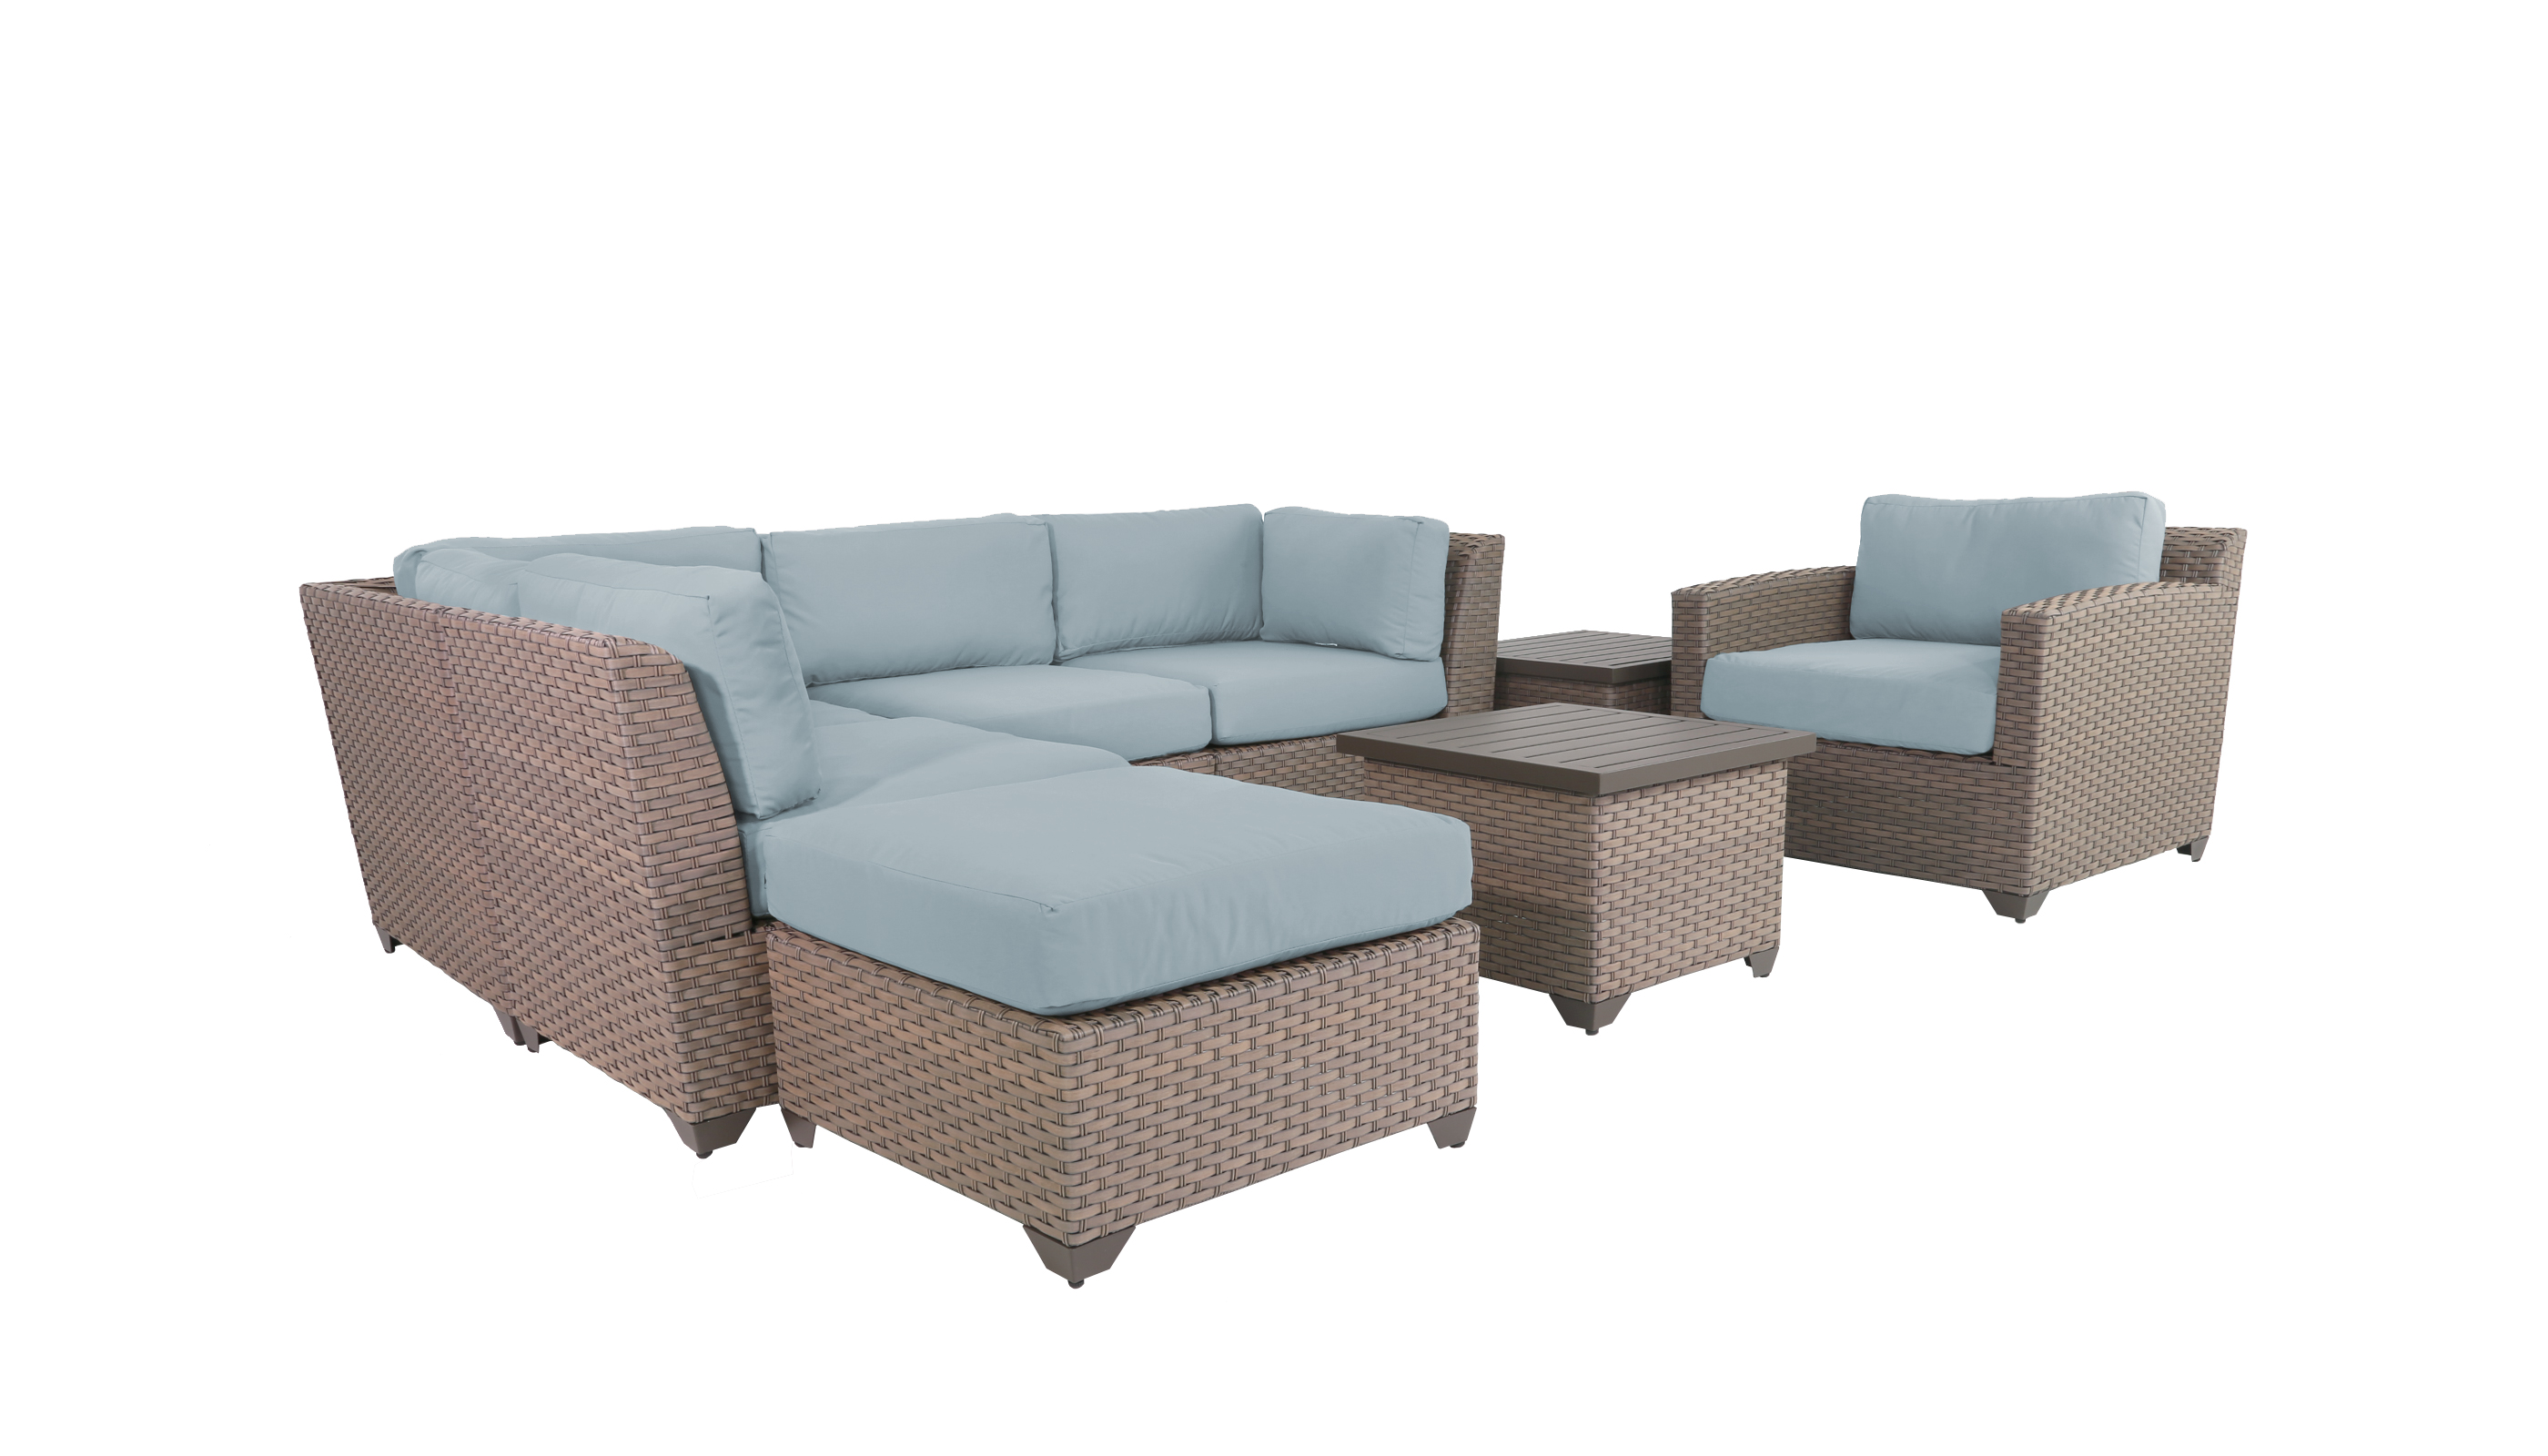 TK Classics Florence Wicker 8 Piece Patio Conversation Set with End Table and 2 Sets of Cushion Covers - image 3 of 11